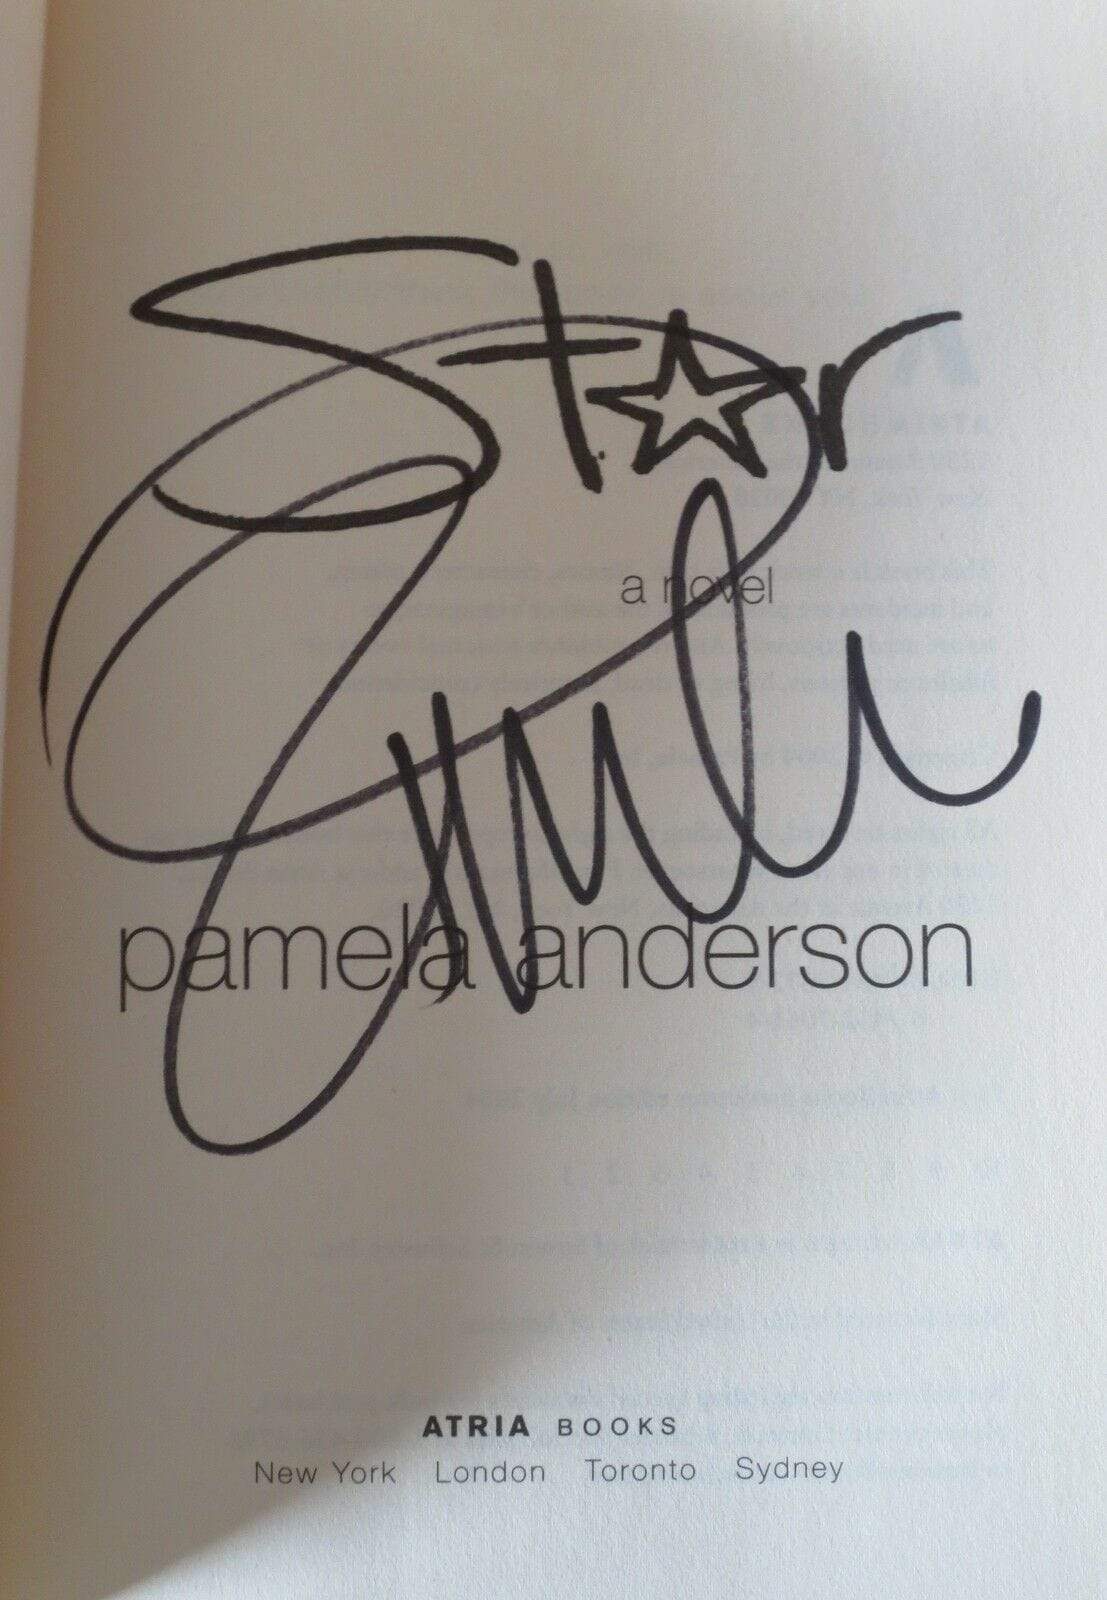 Pamela Anderson Authentic Autographed Star Hardcover Book - Prime Time Signatures - TV & Film